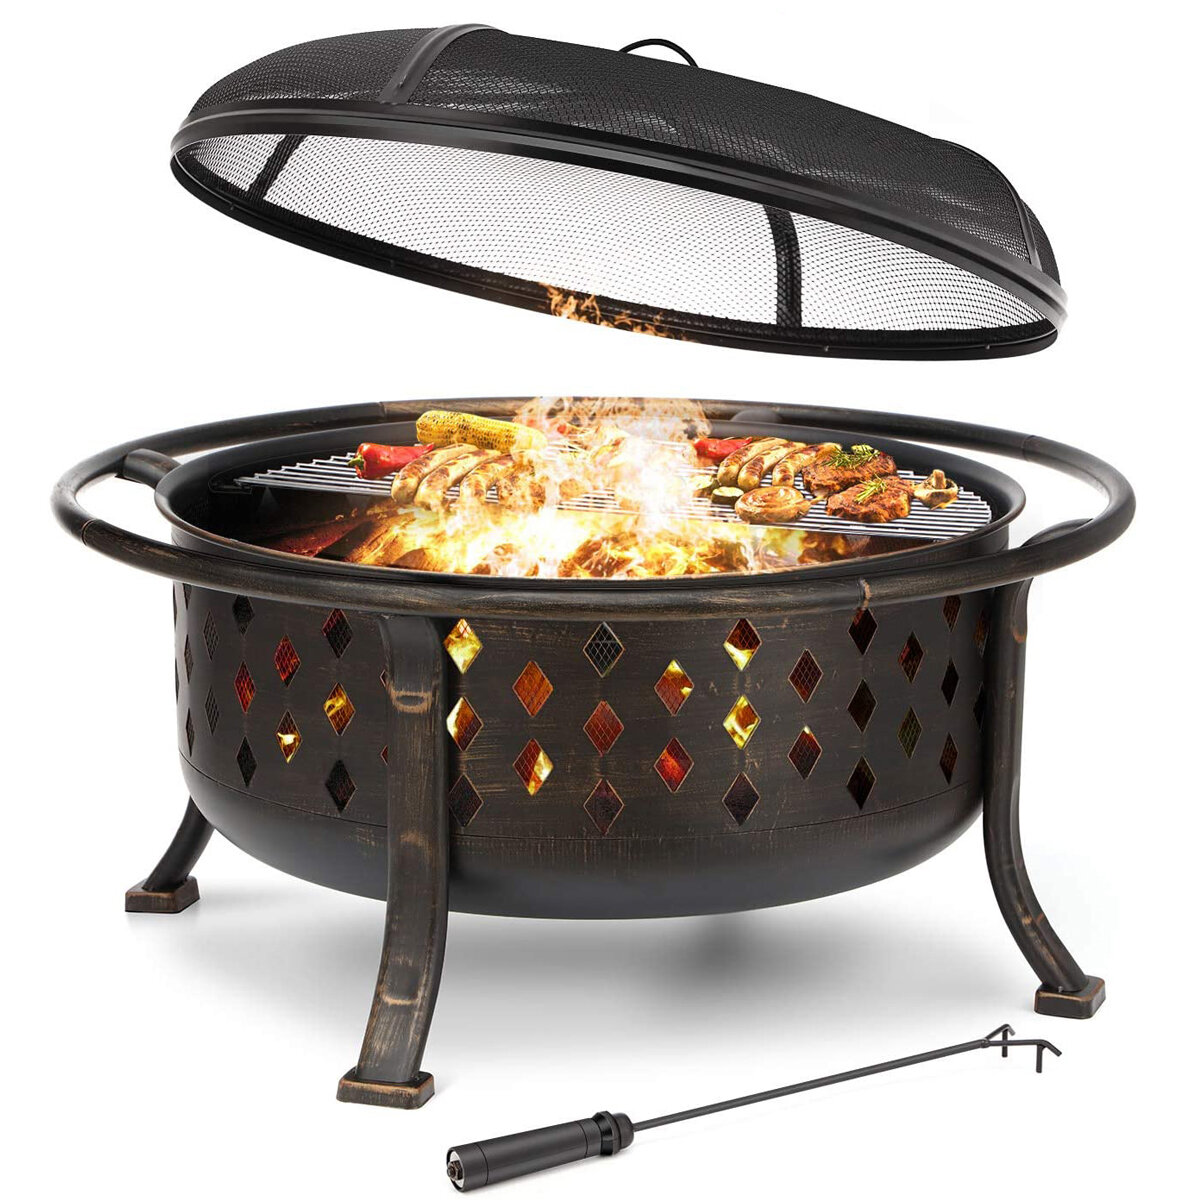 Kingso 36 Inch Fire Pit Bronze Round Steel Wood Burning Firepit with Porker Spark Screen